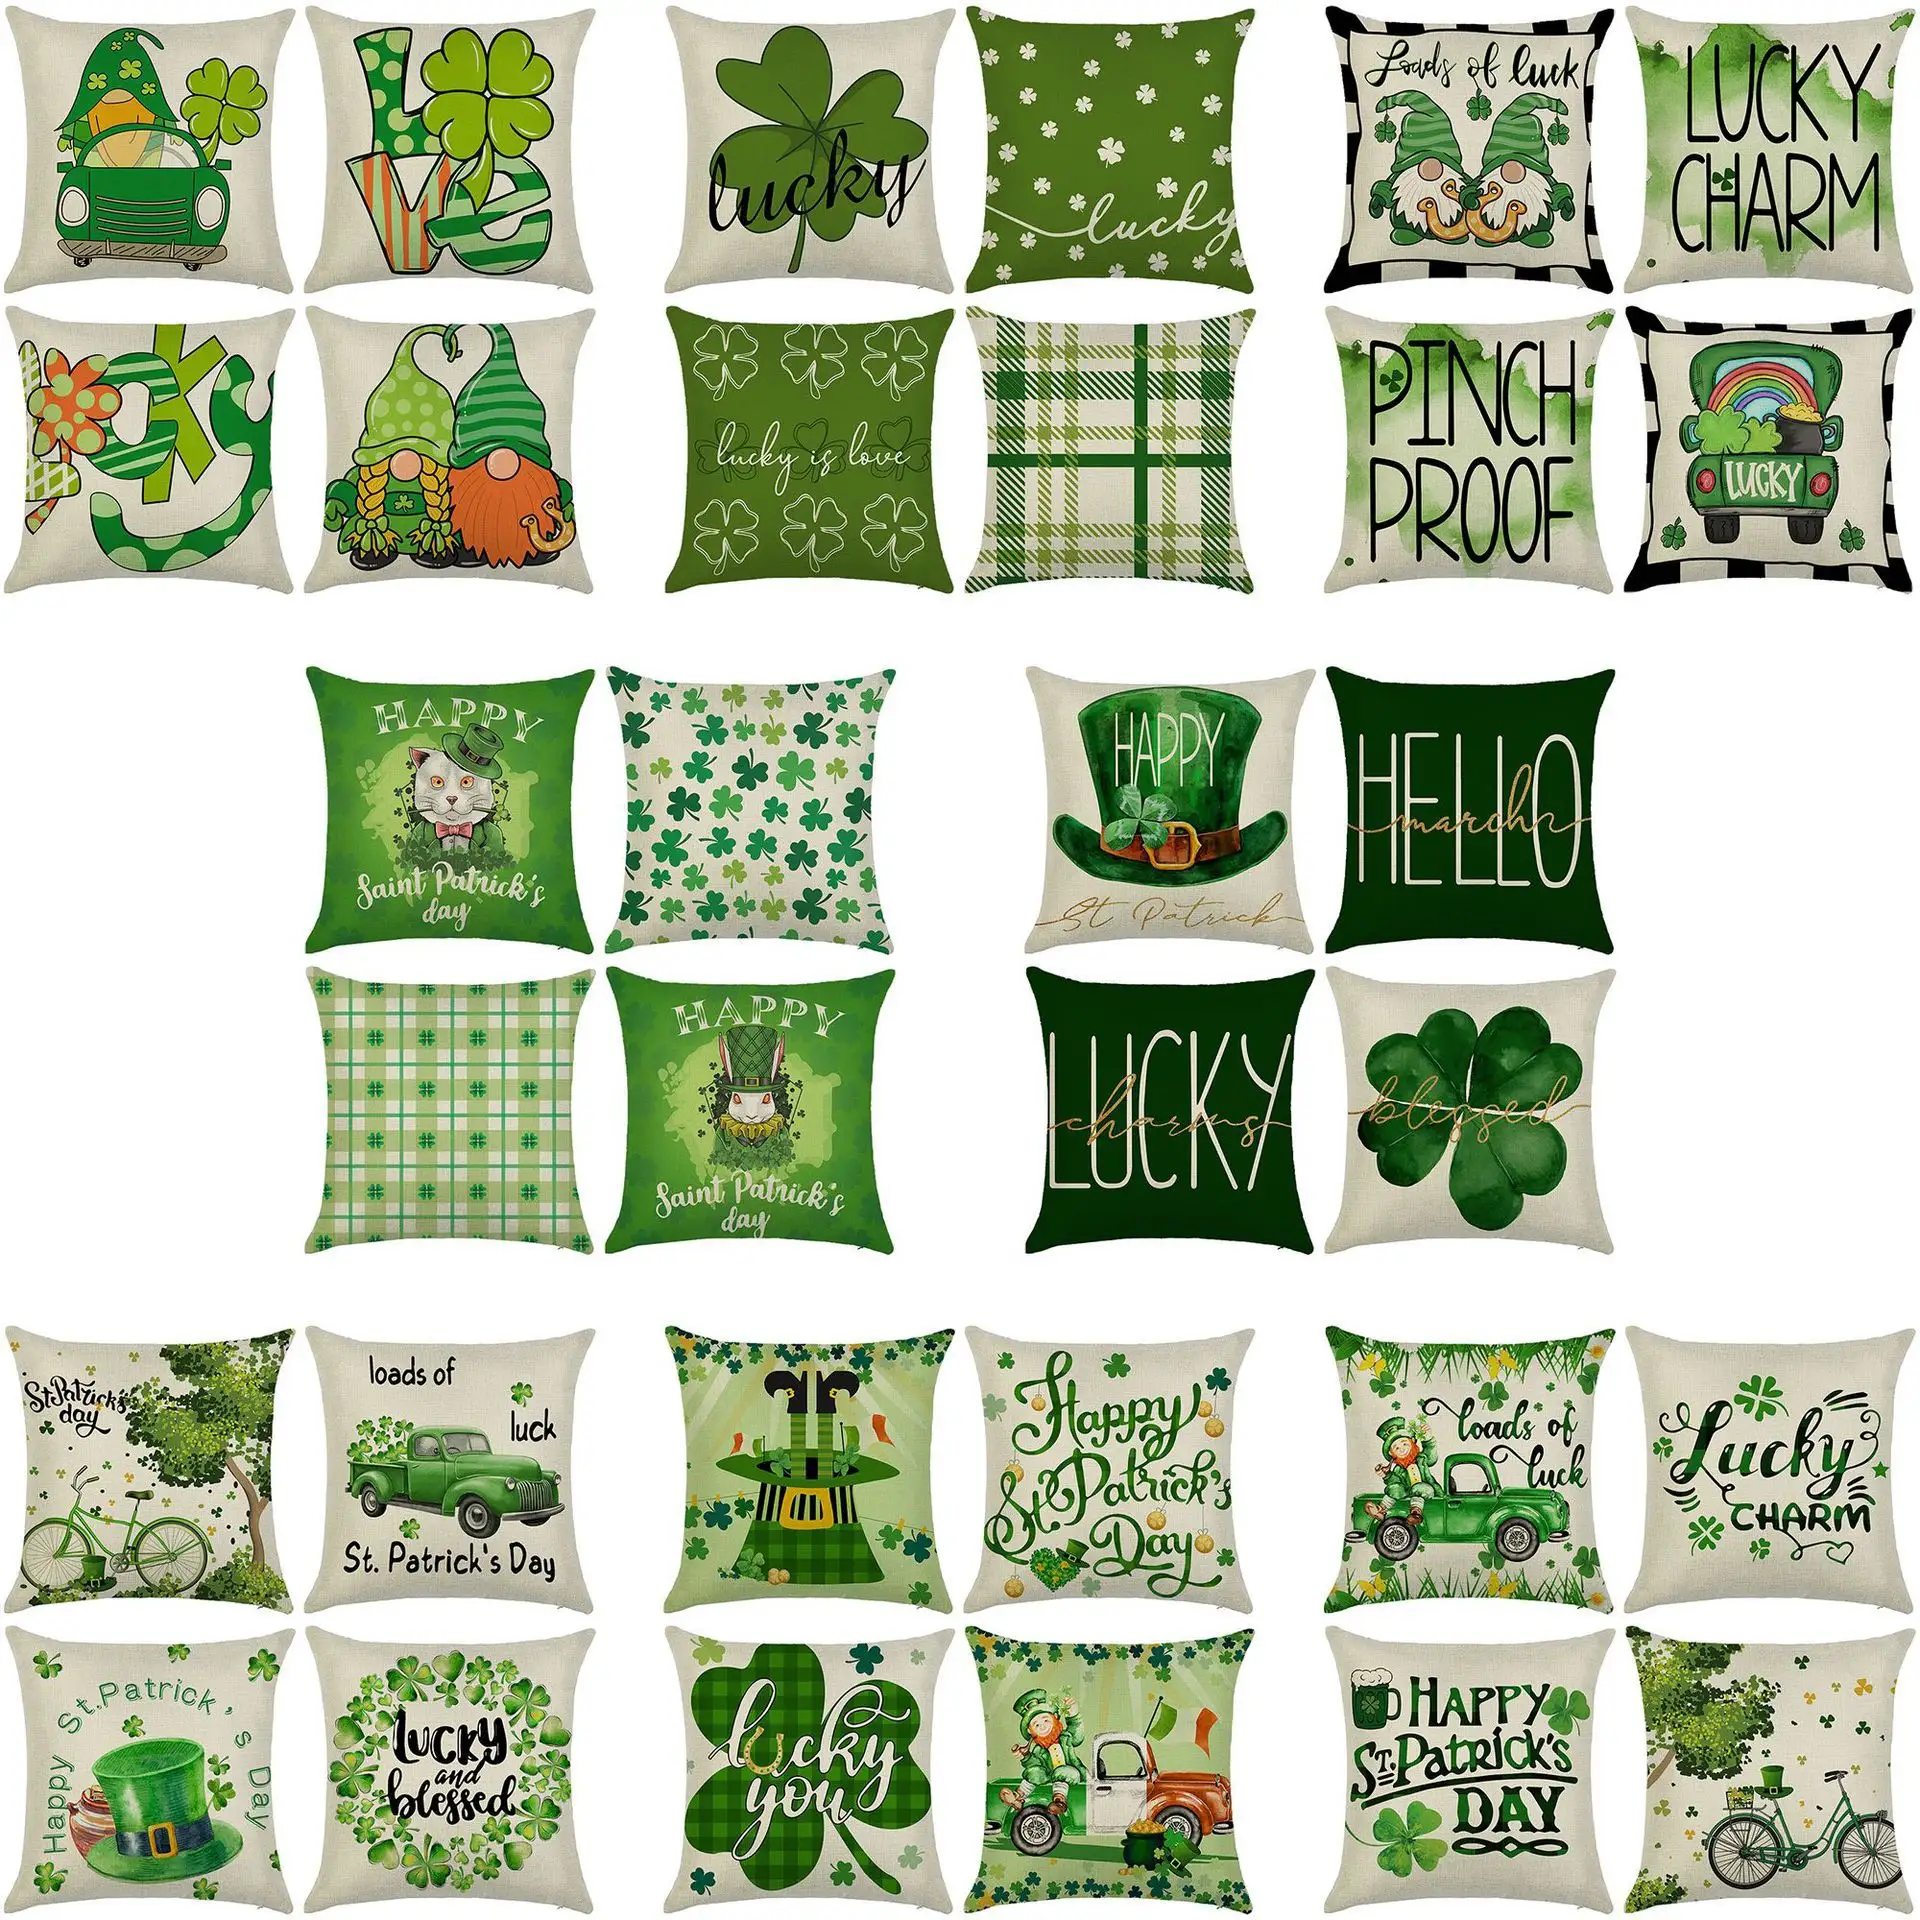 Happy St Patricks Day Decoration Spring Green Leaves Double-sided Printing Decoration Lucky Cushion Cover Decor Pillows For Sofa